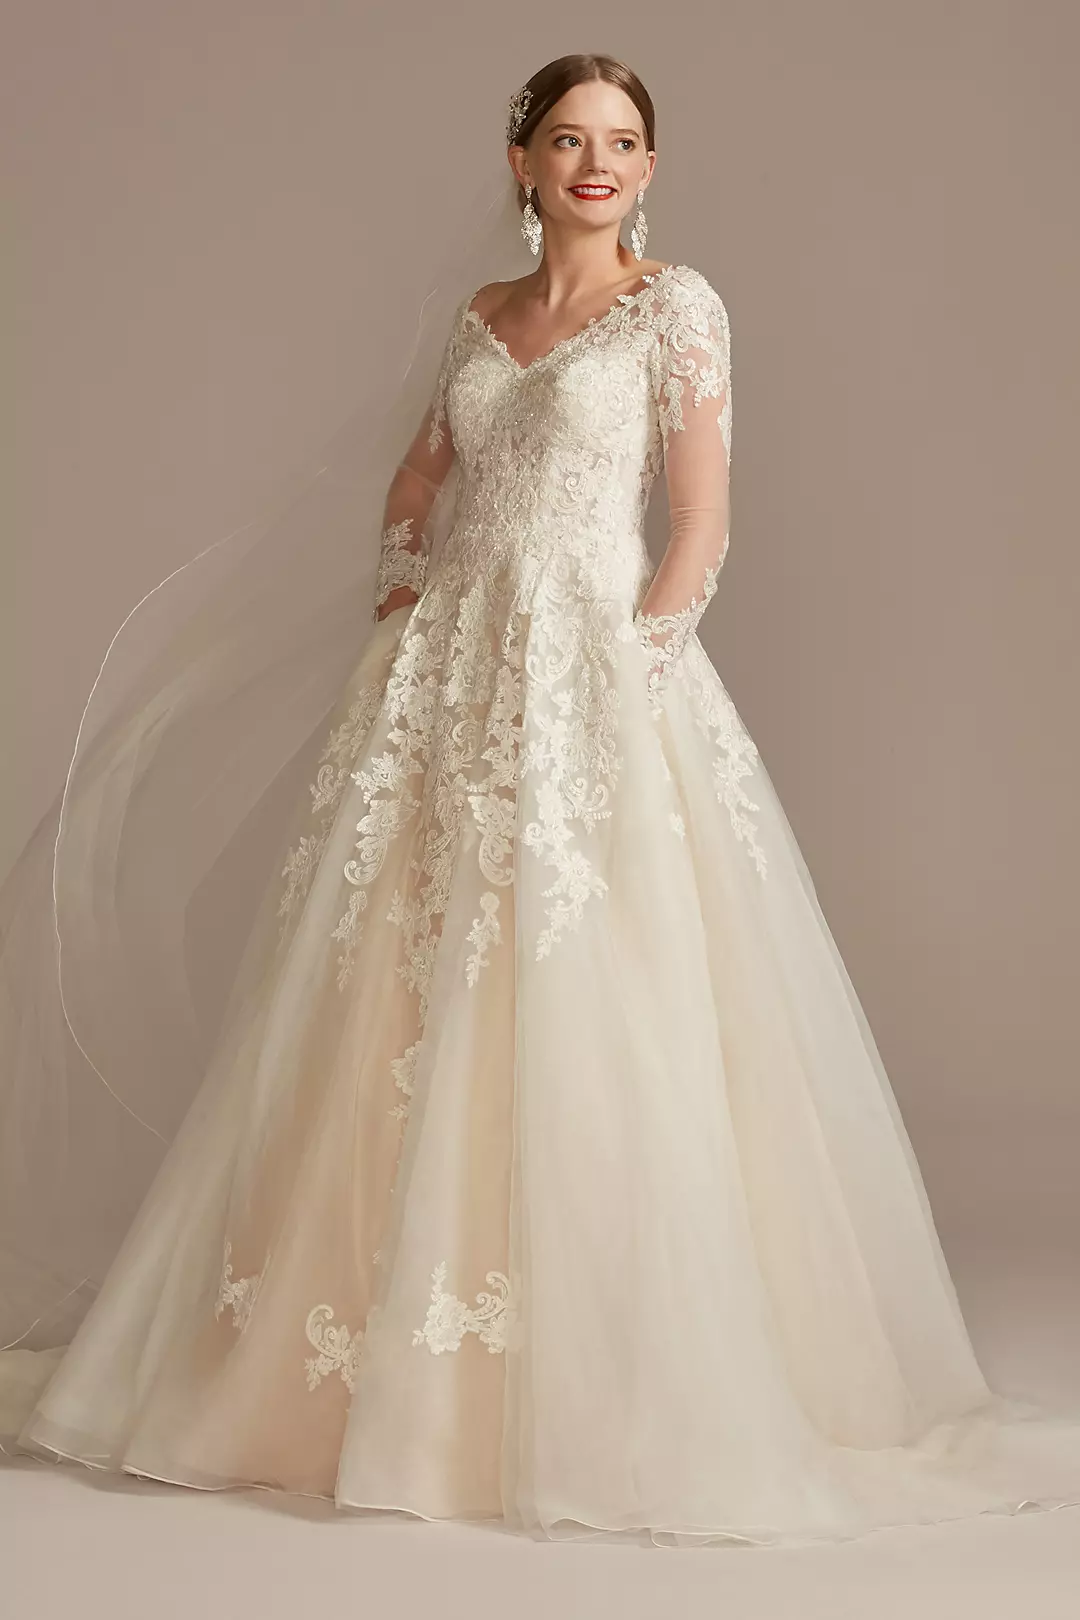 Lace and Tulle Long Sleeve Ball Gown Wedding Dress Image